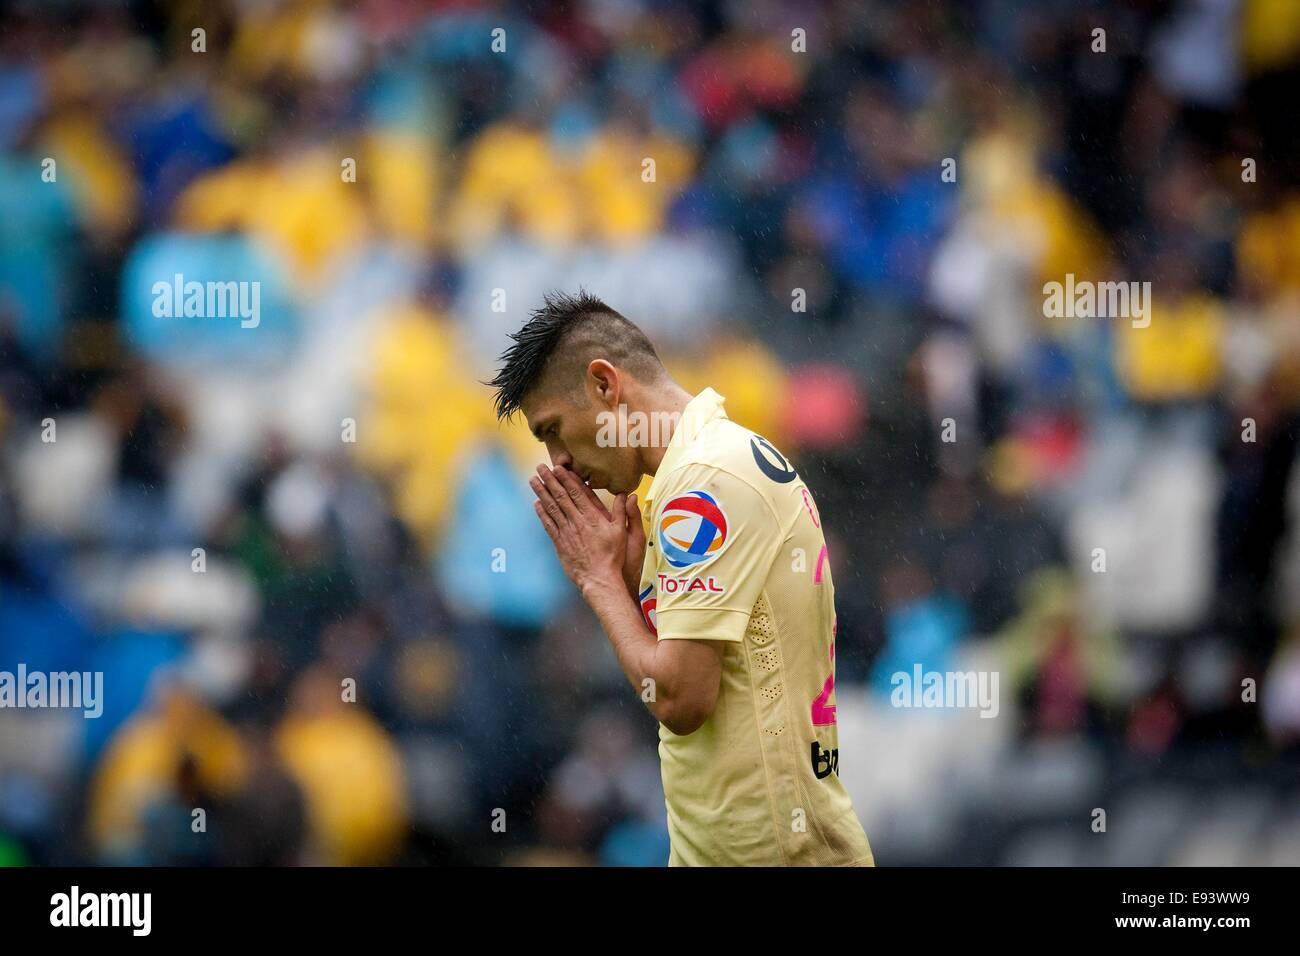 Mexico City, Mexico. 18th Oct, 2014. America's Oribe Peralta reacts during the match of the MX League Opening Tournament 2014 against Monterrey at Azteca Stadium, in Mexico City, capital of Mexico, on Oct. 18, 2014. Credit:  Pedro Mera/Xinhua/Alamy Live News Stock Photo